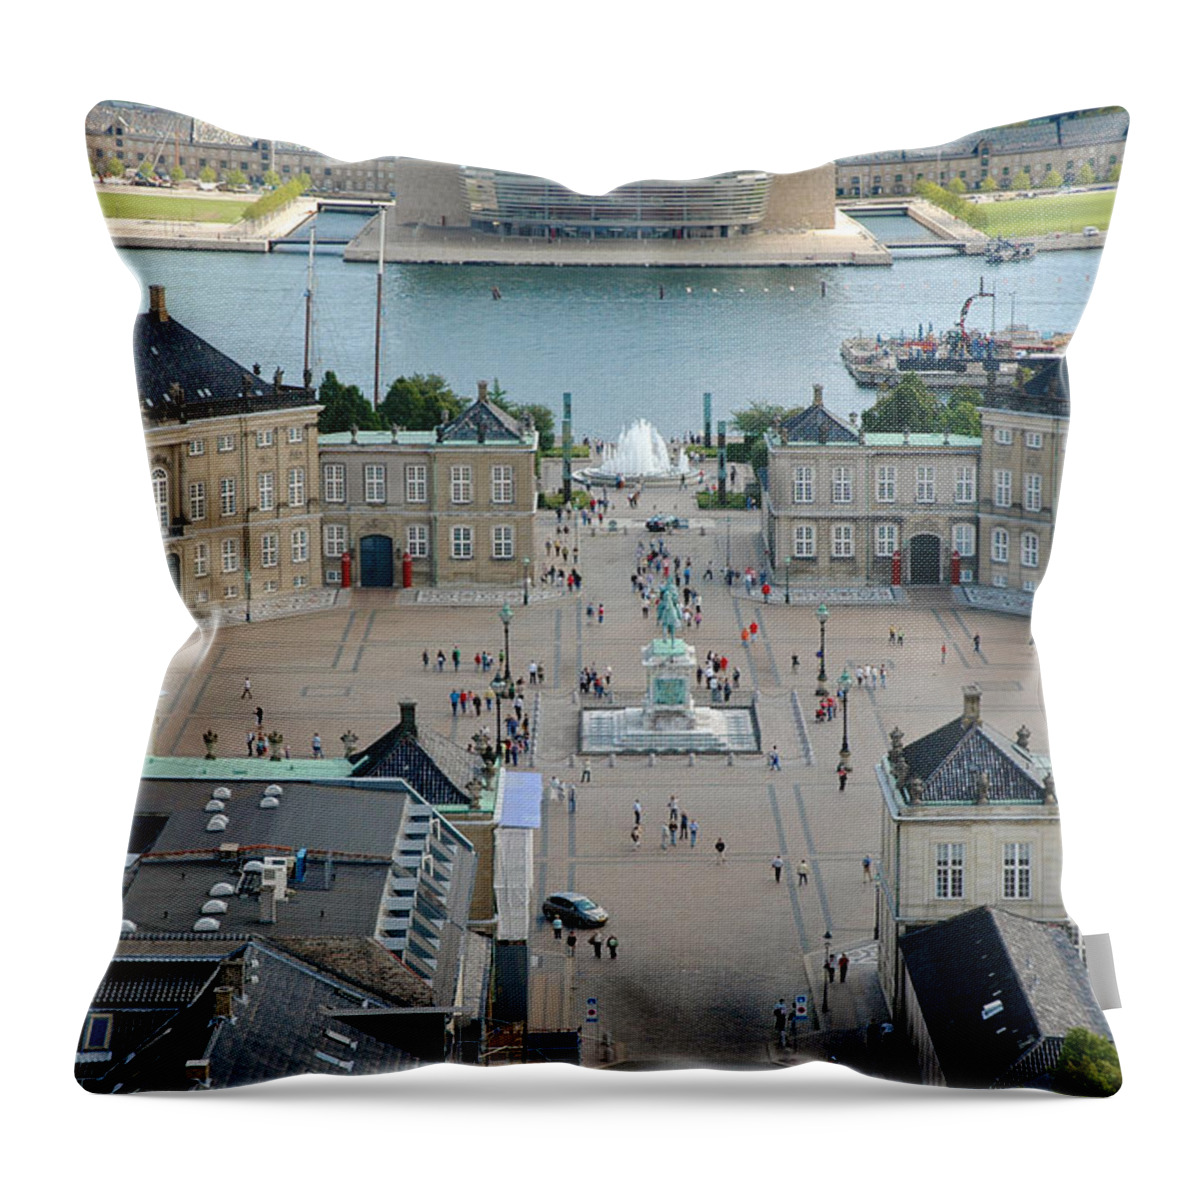 Landscapes Throw Pillow featuring the photograph Amalienborg Palace Copenhagen by Mary Lee Dereske